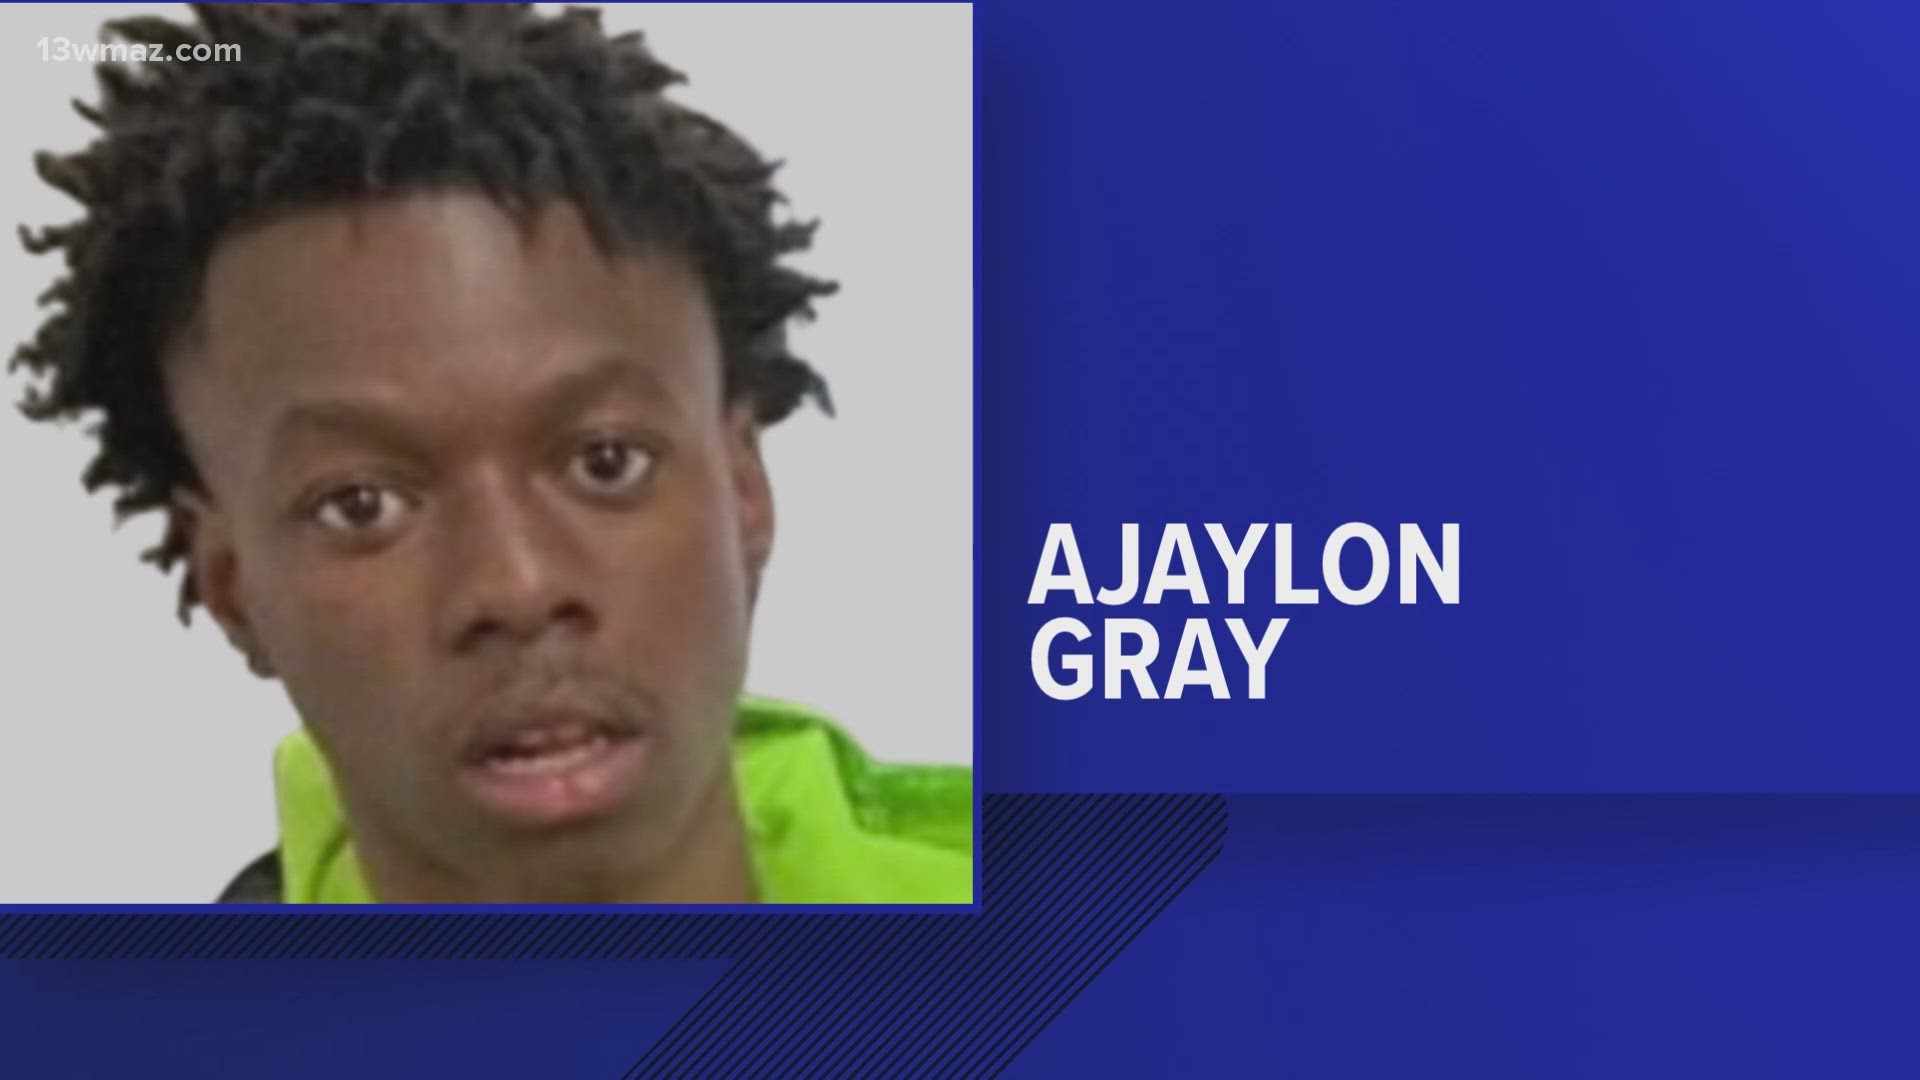 Ajaylon Gray was arrested on Thursday at a hotel on "multiple outstanding warrants," the Crisp County Sheriff's Office says.